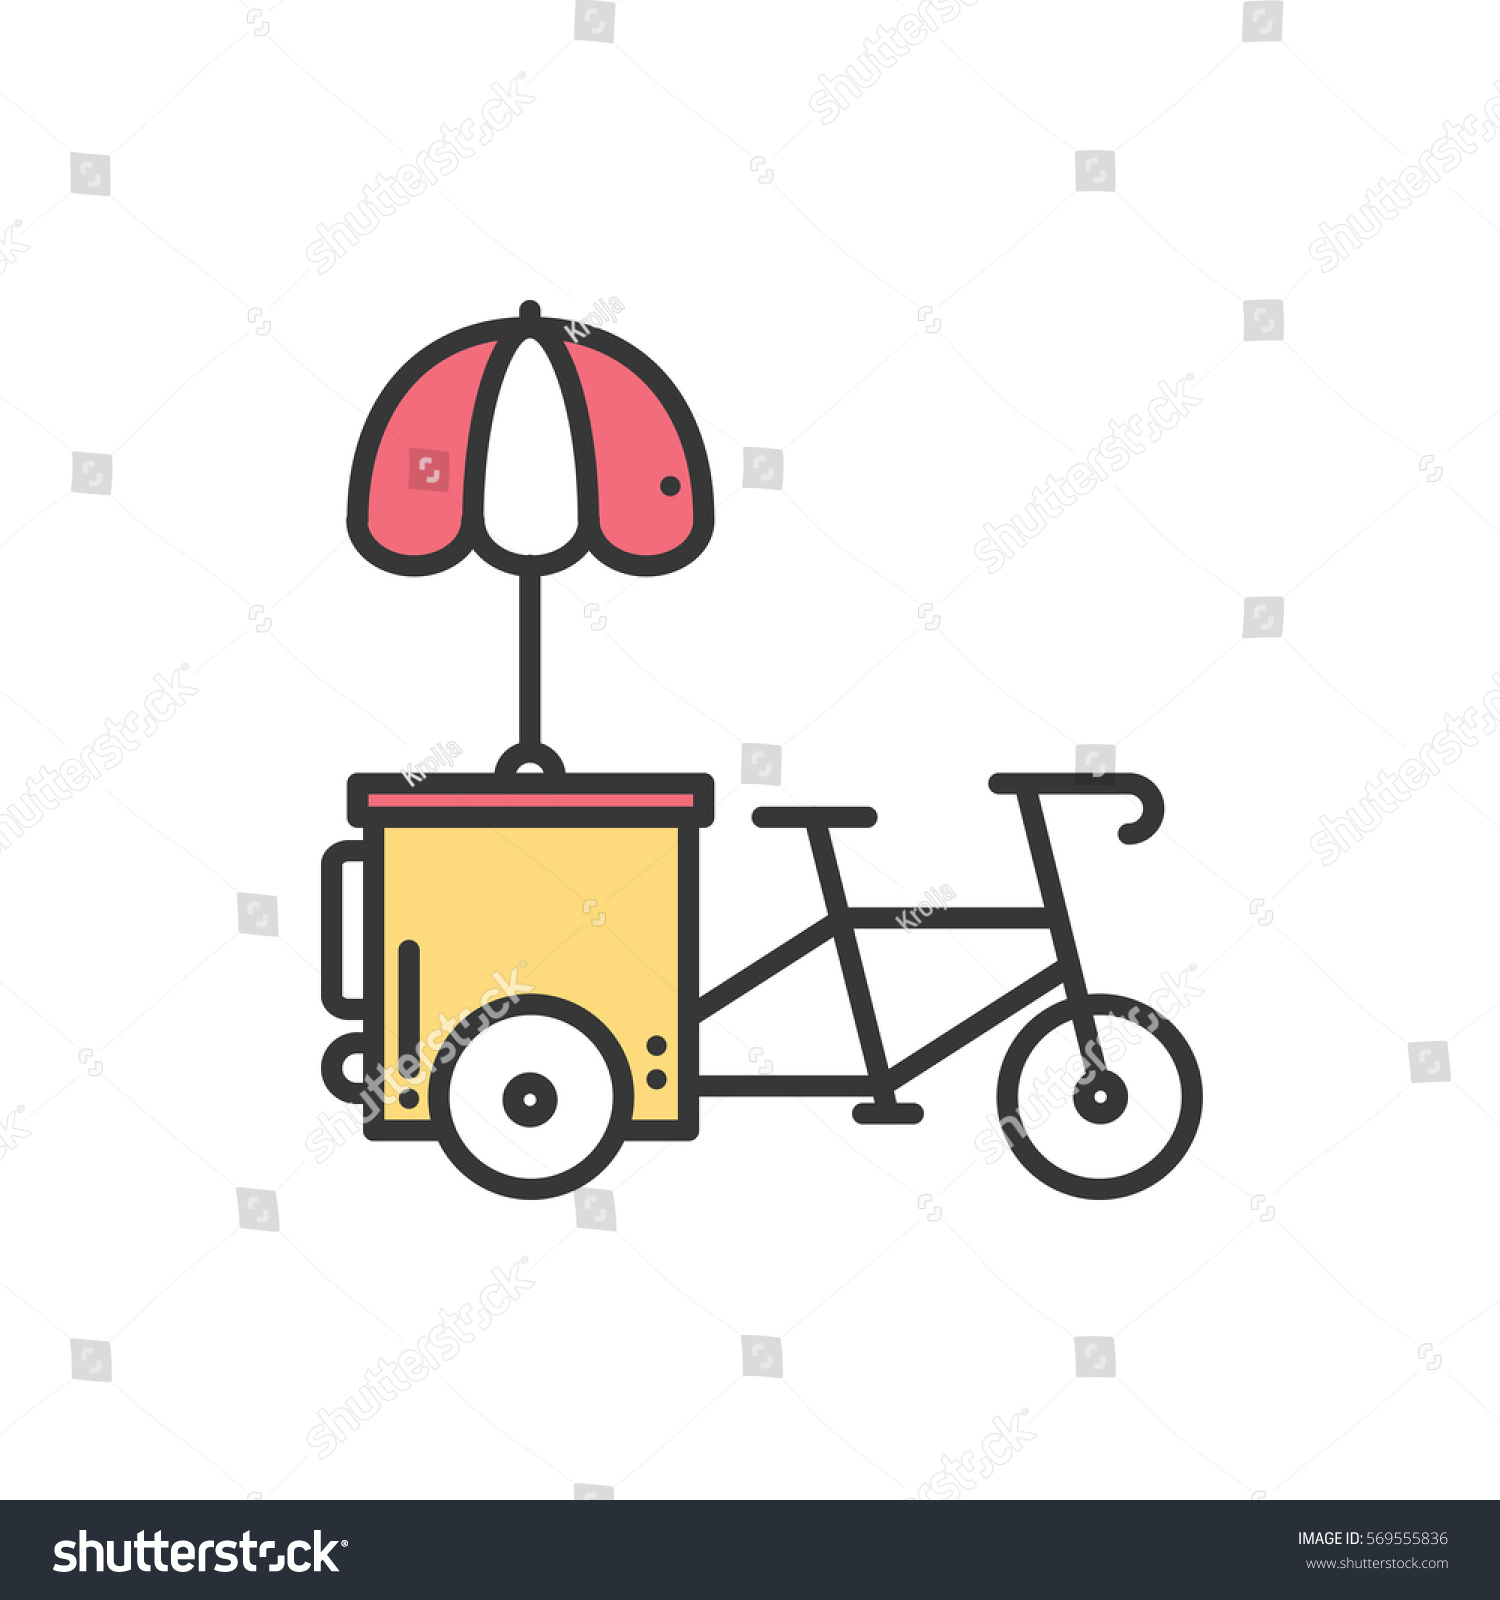 SVG of Street food retail thin line icon. Tricycle trade cart. Fast food trolley bike, bicycle. Wheel shop, cafe, mobile kiosk, stall. Vector style linear icon. Isolated illustration. Symbols. Yellow svg